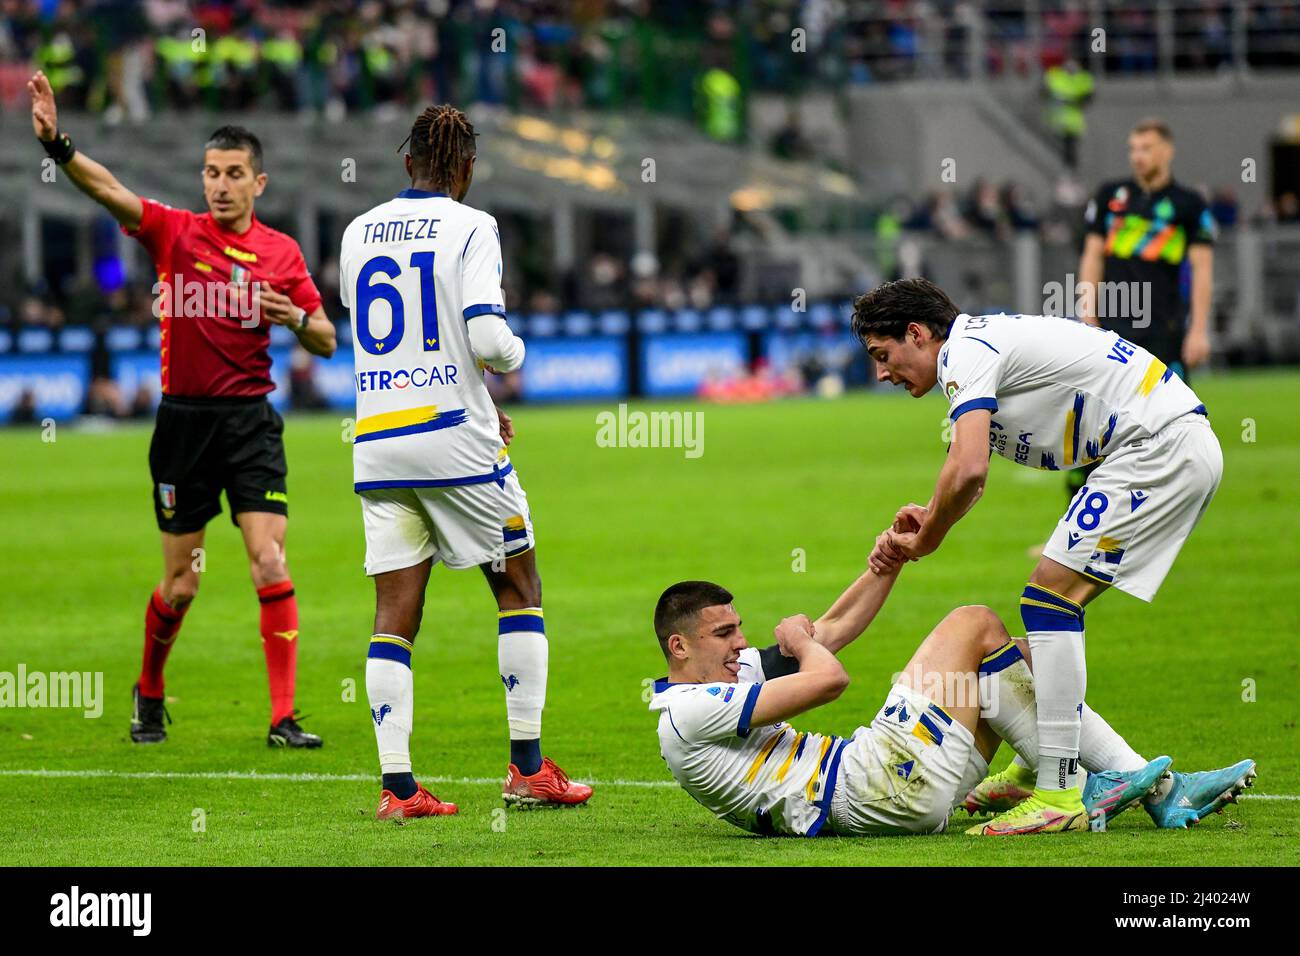 Milano, Italy. 09th, April 2022. Bosko Sutalo (31) and Matteo Cancellieri (18) of Hellas Verona seen in the Serie A match between Inter and Hellas Verona at Giuseppe Meazza in Milano. (Photo credit: Gonzales Photo - Tommaso Fimiano). Stock Photo